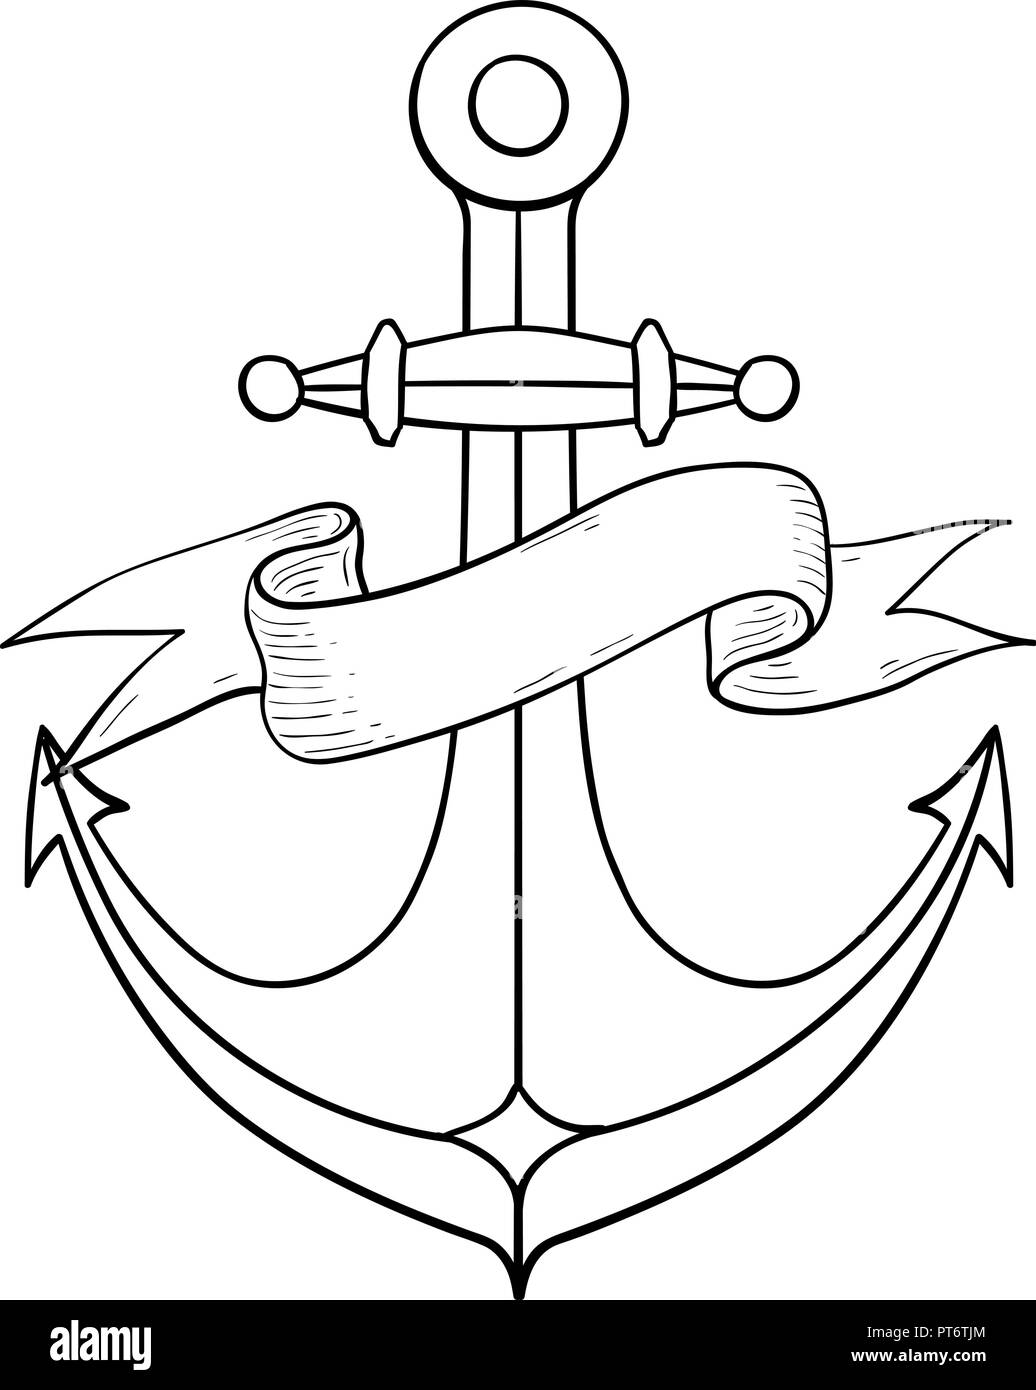 Anchor. Outline drawing, hand drawn sketch Stock Vector Image ...